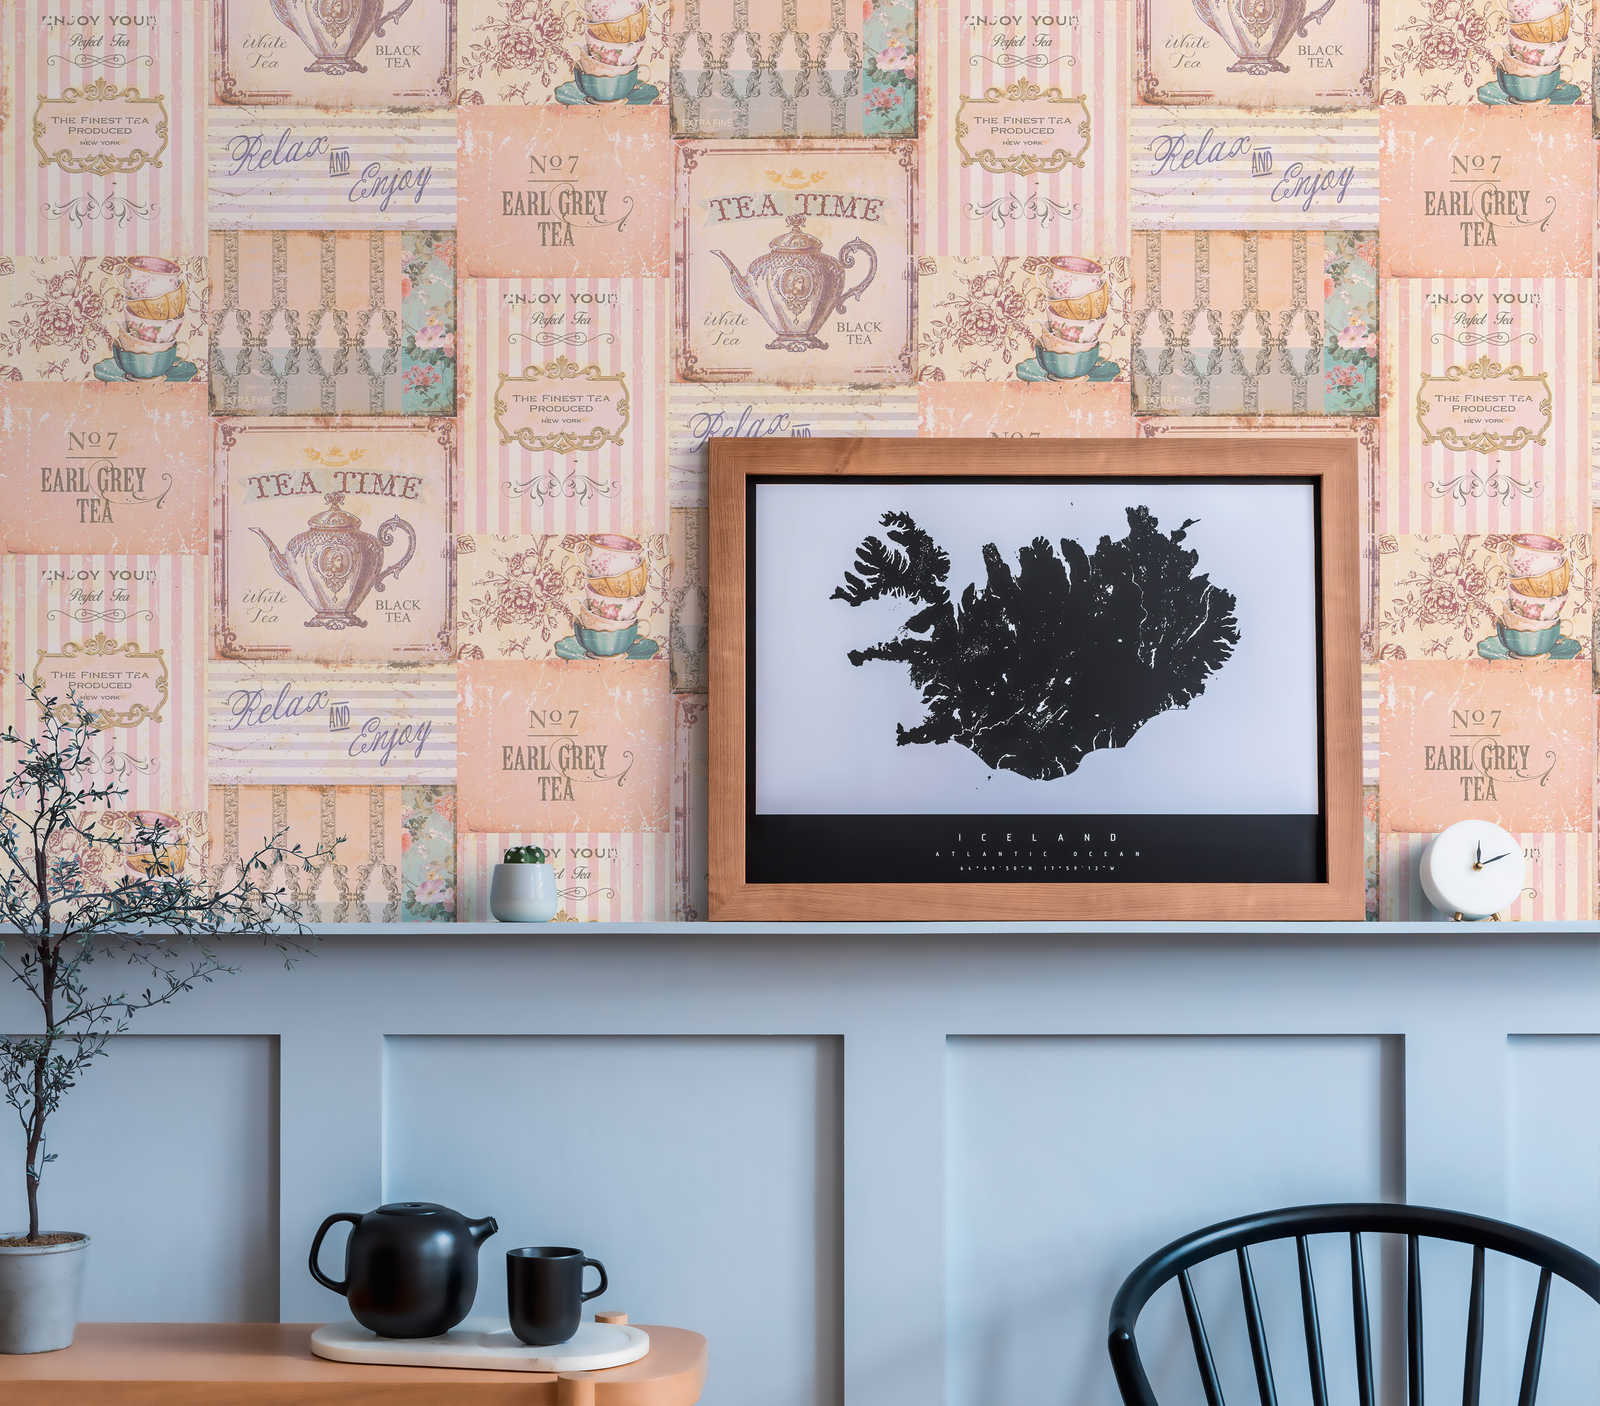             Kitchen wallpaper Tea Time collage in country style - pink, grey, blue
        